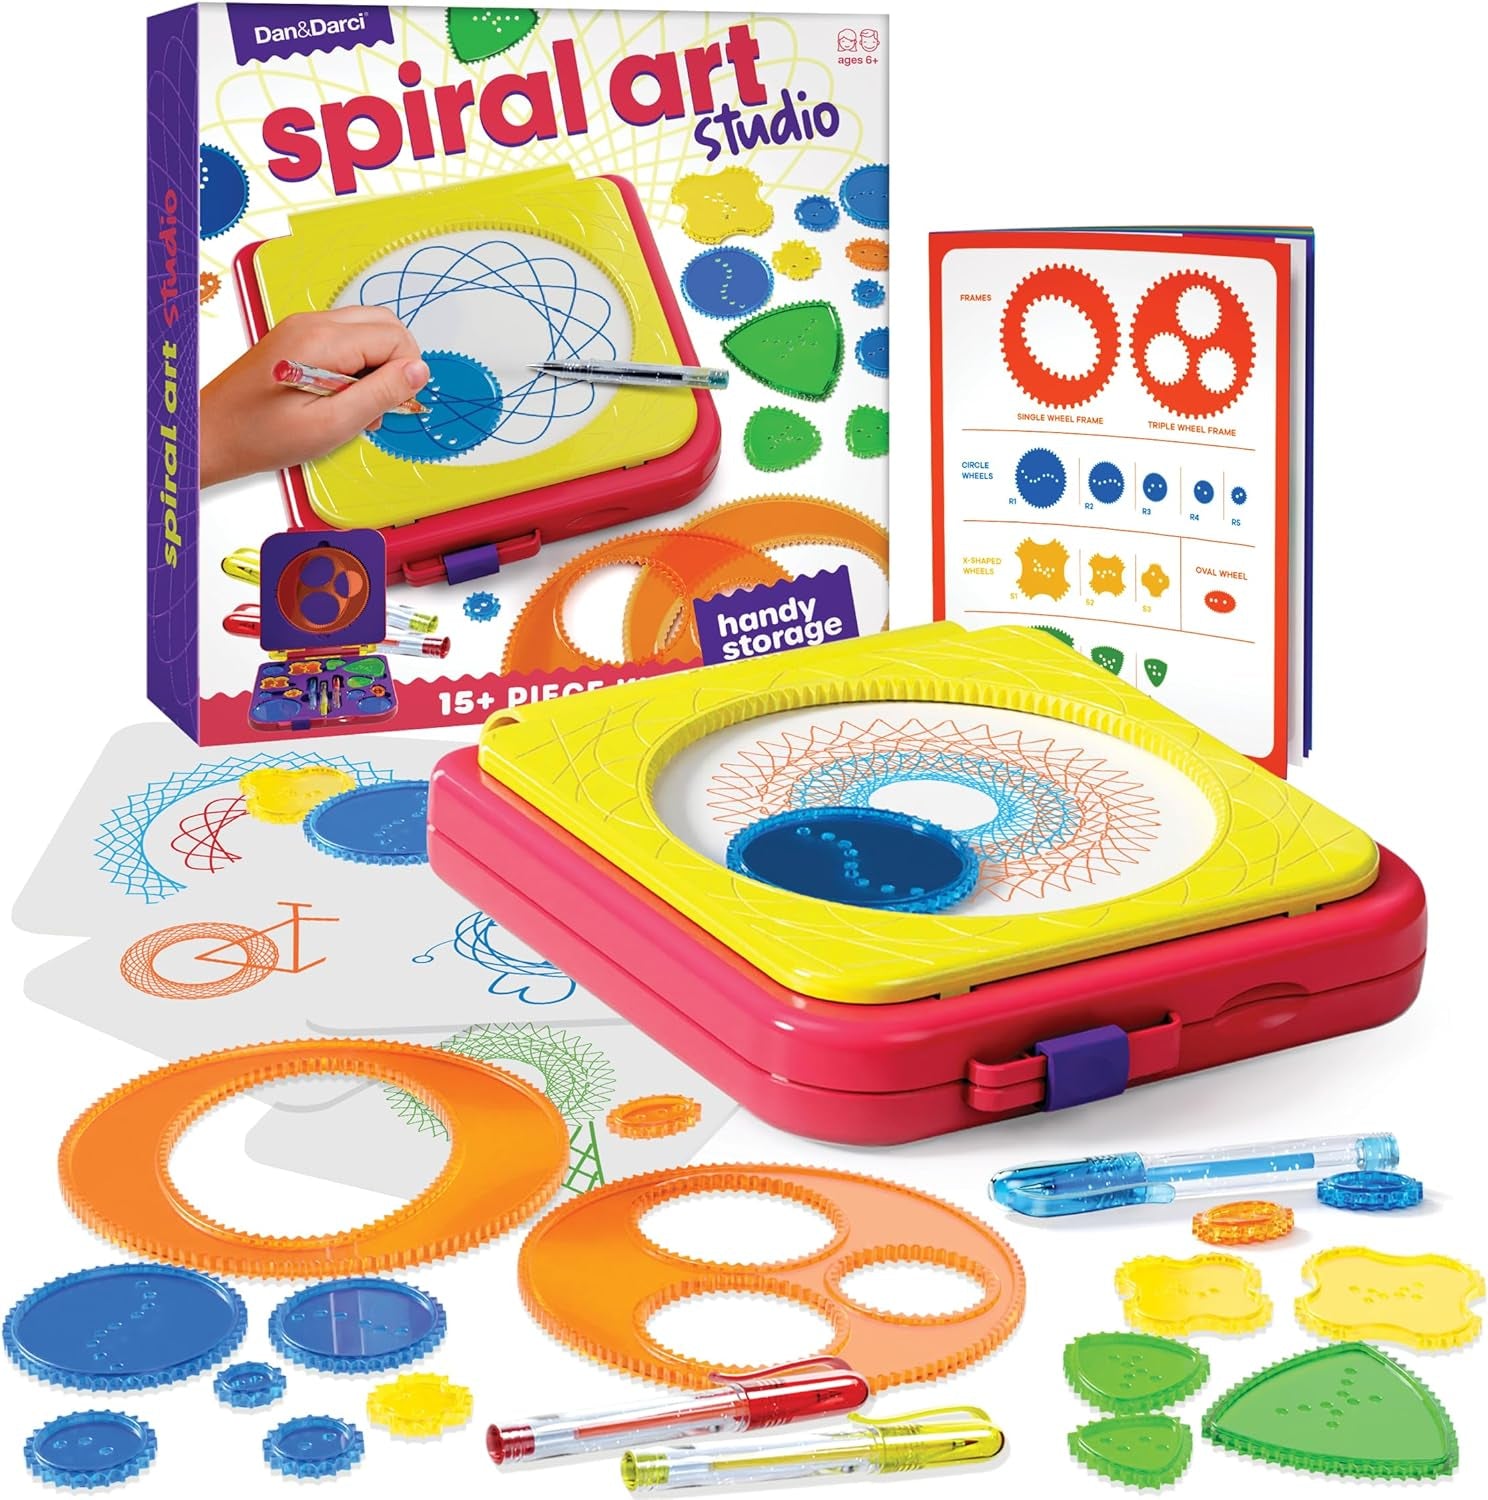 Spiral Art Kit for Kids - Craft Set for Girls & Boys Ages 6-12 - Gifts for 6, 7, 8. 9, 10 Year Old Girl, Boy - Toys and Crafts Kits Gift - Arts Birthday Retro Vintage Ideas Drawing